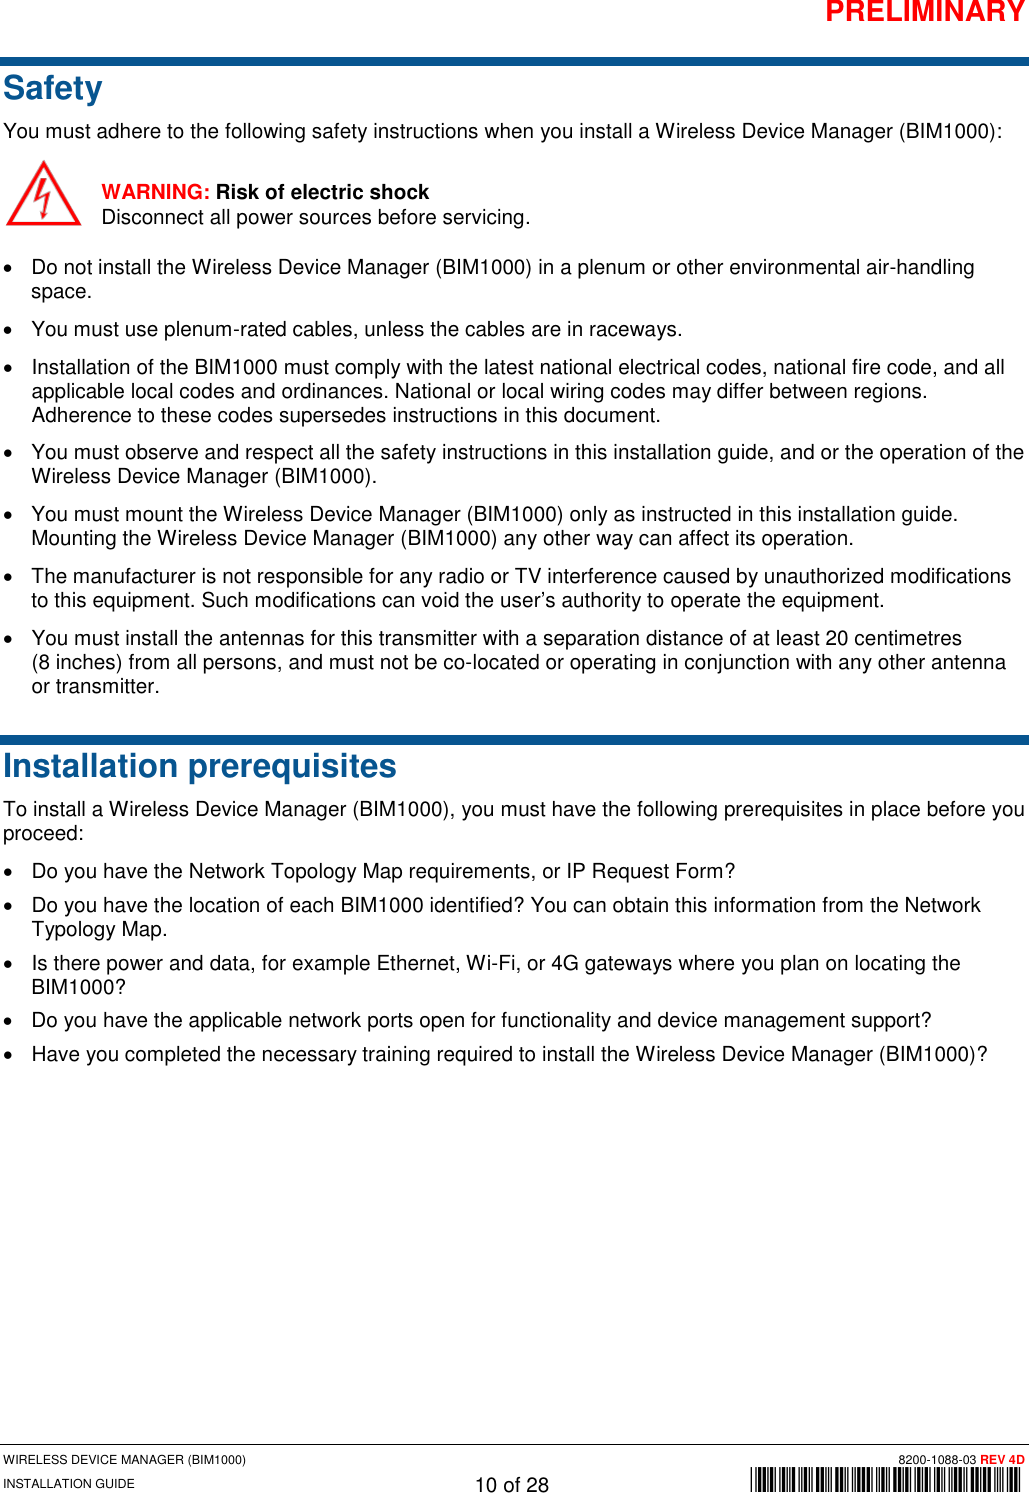 PRELIMINARY WIRELESS DEVICE MANAGER (BIM1000) 8200-1088-03 REV 4D INSTALLATION GUIDE 10 of 28        *8200-1088-03* Safety You must adhere to the following safety instructions when you install a Wireless Device Manager (BIM1000): WARNING: Risk of electric shock Disconnect all power sources before servicing. • Do not install the Wireless Device Manager (BIM1000) in a plenum or other environmental air-handling space. • You must use plenum-rated cables, unless the cables are in raceways. • Installation of the BIM1000 must comply with the latest national electrical codes, national fire code, and all applicable local codes and ordinances. National or local wiring codes may differ between regions. Adherence to these codes supersedes instructions in this document.  • You must observe and respect all the safety instructions in this installation guide, and or the operation of the Wireless Device Manager (BIM1000).  • You must mount the Wireless Device Manager (BIM1000) only as instructed in this installation guide. Mounting the Wireless Device Manager (BIM1000) any other way can affect its operation. • The manufacturer is not responsible for any radio or TV interference caused by unauthorized modifications to this equipment. Such modifications can void the user’s authority to operate the equipment.  • You must install the antennas for this transmitter with a separation distance of at least 20 centimetres  (8 inches) from all persons, and must not be co-located or operating in conjunction with any other antenna or transmitter. Installation prerequisites  To install a Wireless Device Manager (BIM1000), you must have the following prerequisites in place before you proceed: • Do you have the Network Topology Map requirements, or IP Request Form? • Do you have the location of each BIM1000 identified? You can obtain this information from the Network Typology Map. • Is there power and data, for example Ethernet, Wi-Fi, or 4G gateways where you plan on locating the BIM1000? • Do you have the applicable network ports open for functionality and device management support? • Have you completed the necessary training required to install the Wireless Device Manager (BIM1000)?   